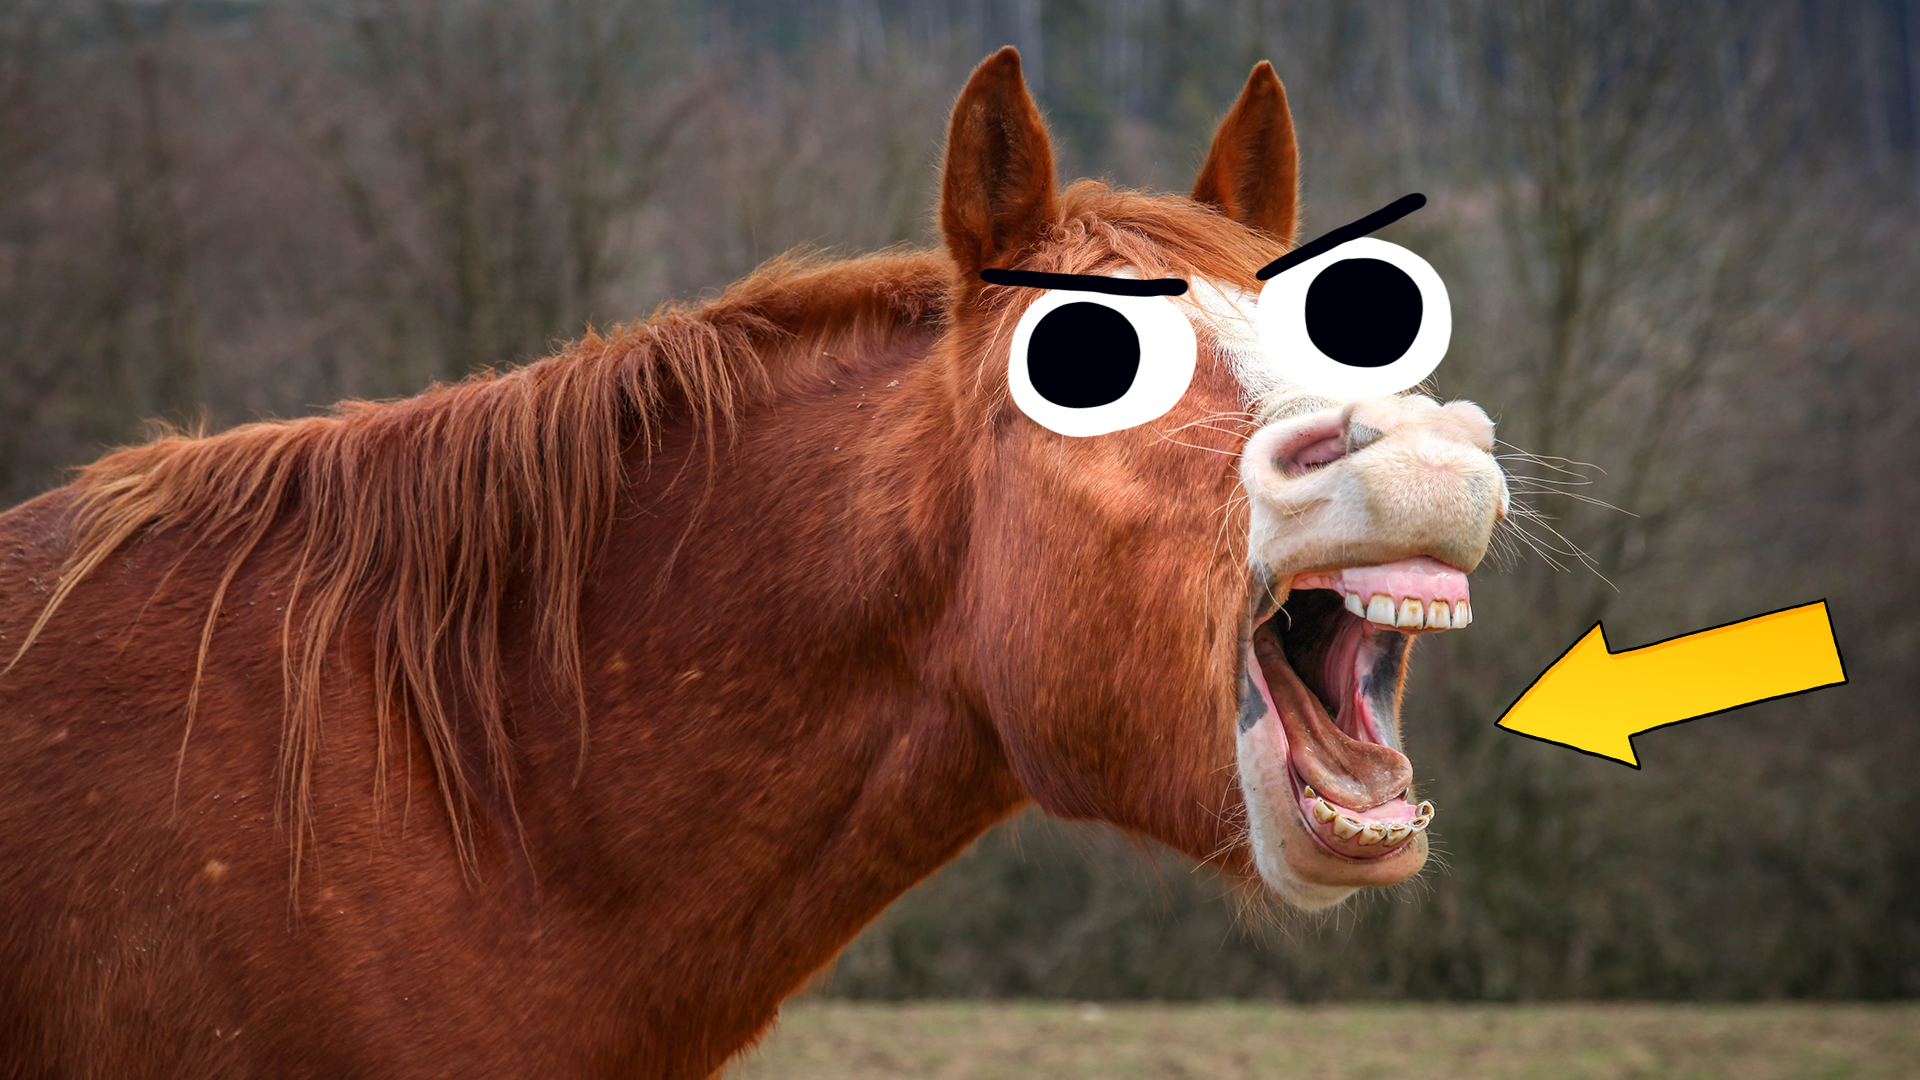 A horse showing it's teeth